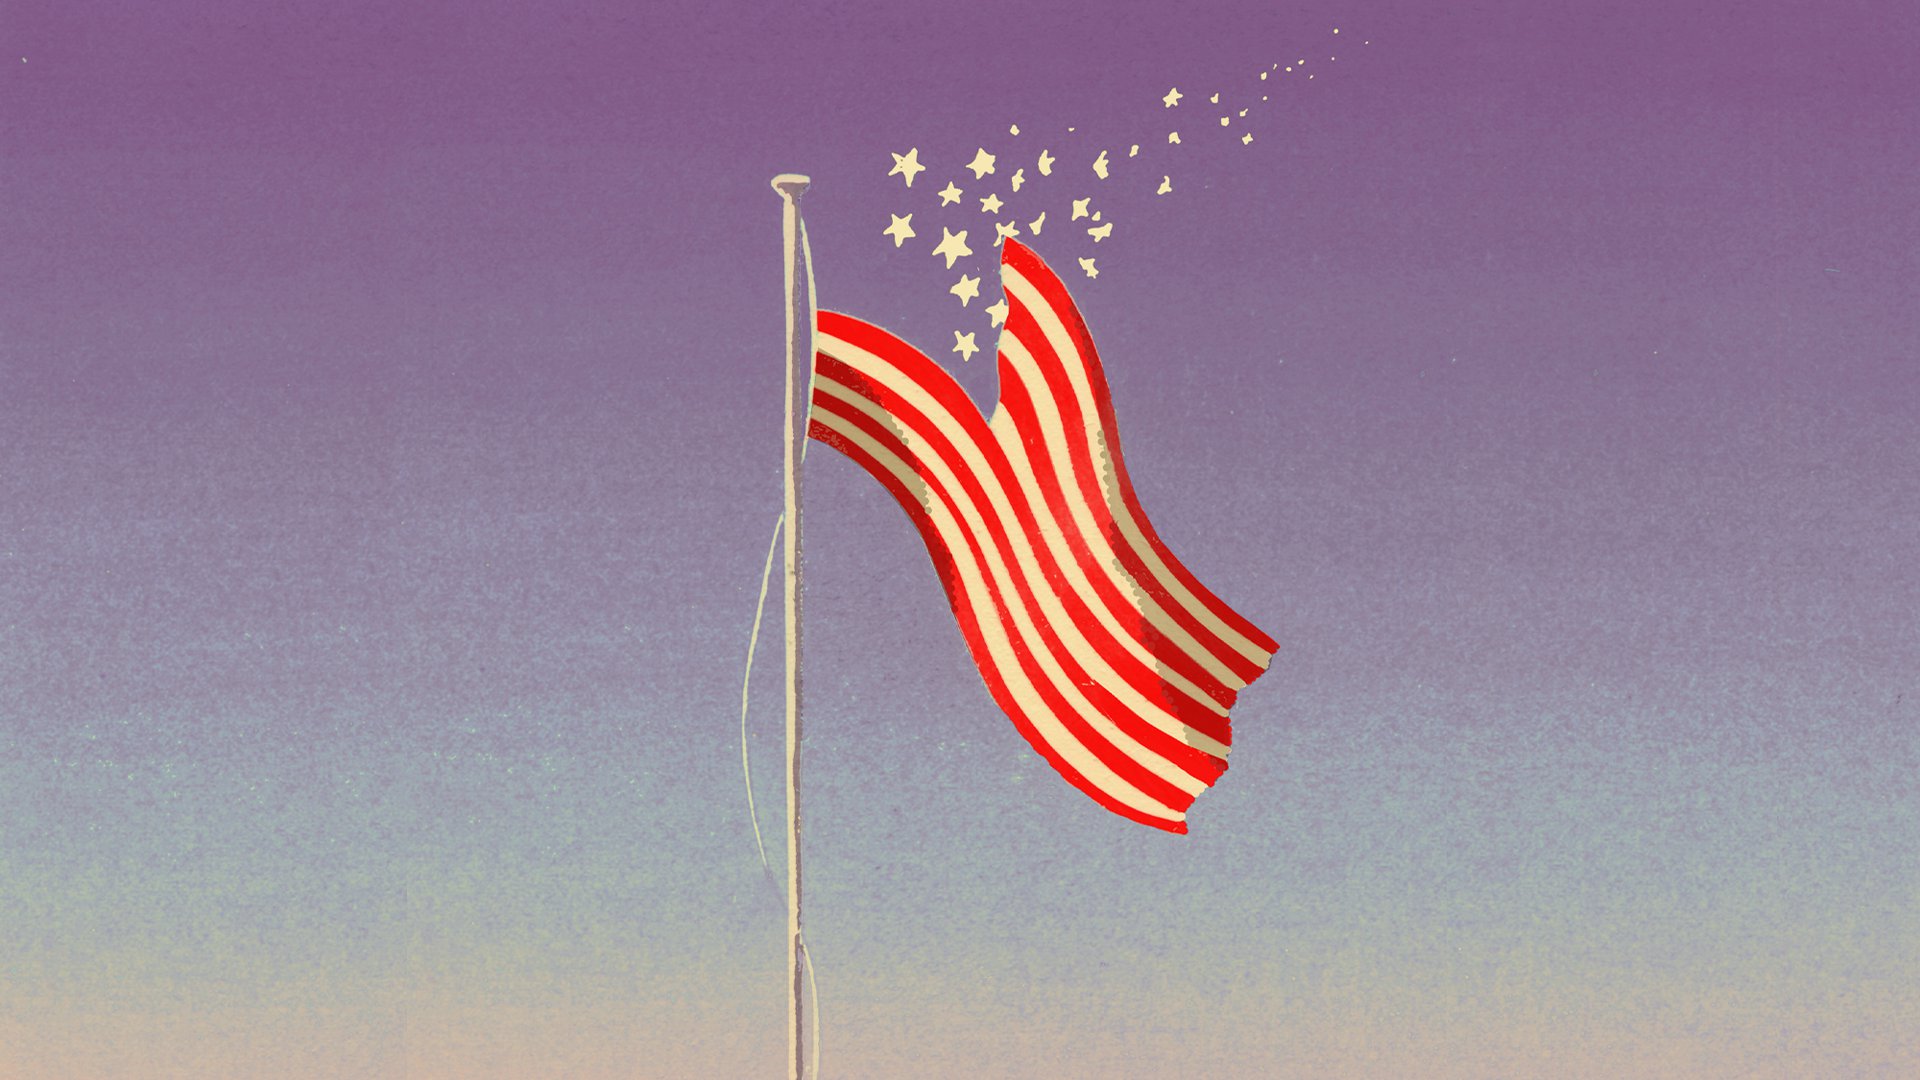 illustration of the American flag